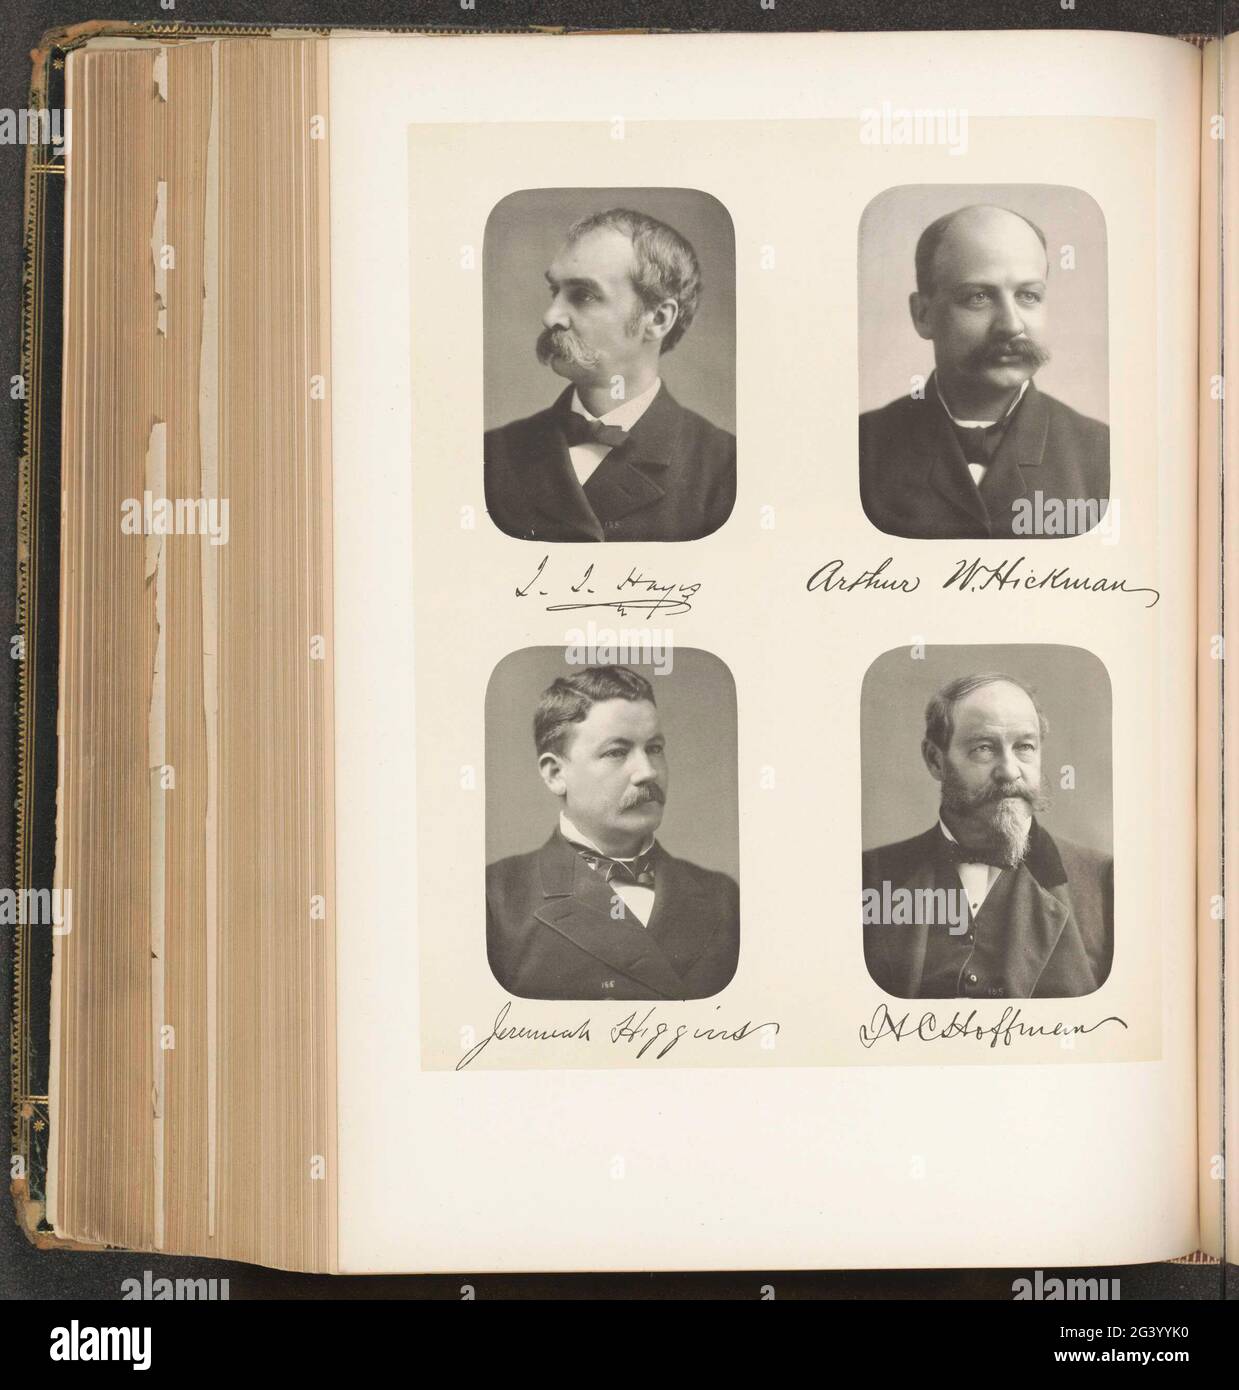 Portraits of four members of the Lower House of the State New York. Top left Isaac I. Hayes, at the top right Arthur W. Hickman, bottom left Jeremiah Higgins, bottom right Henry C. Hoffman. Stock Photo